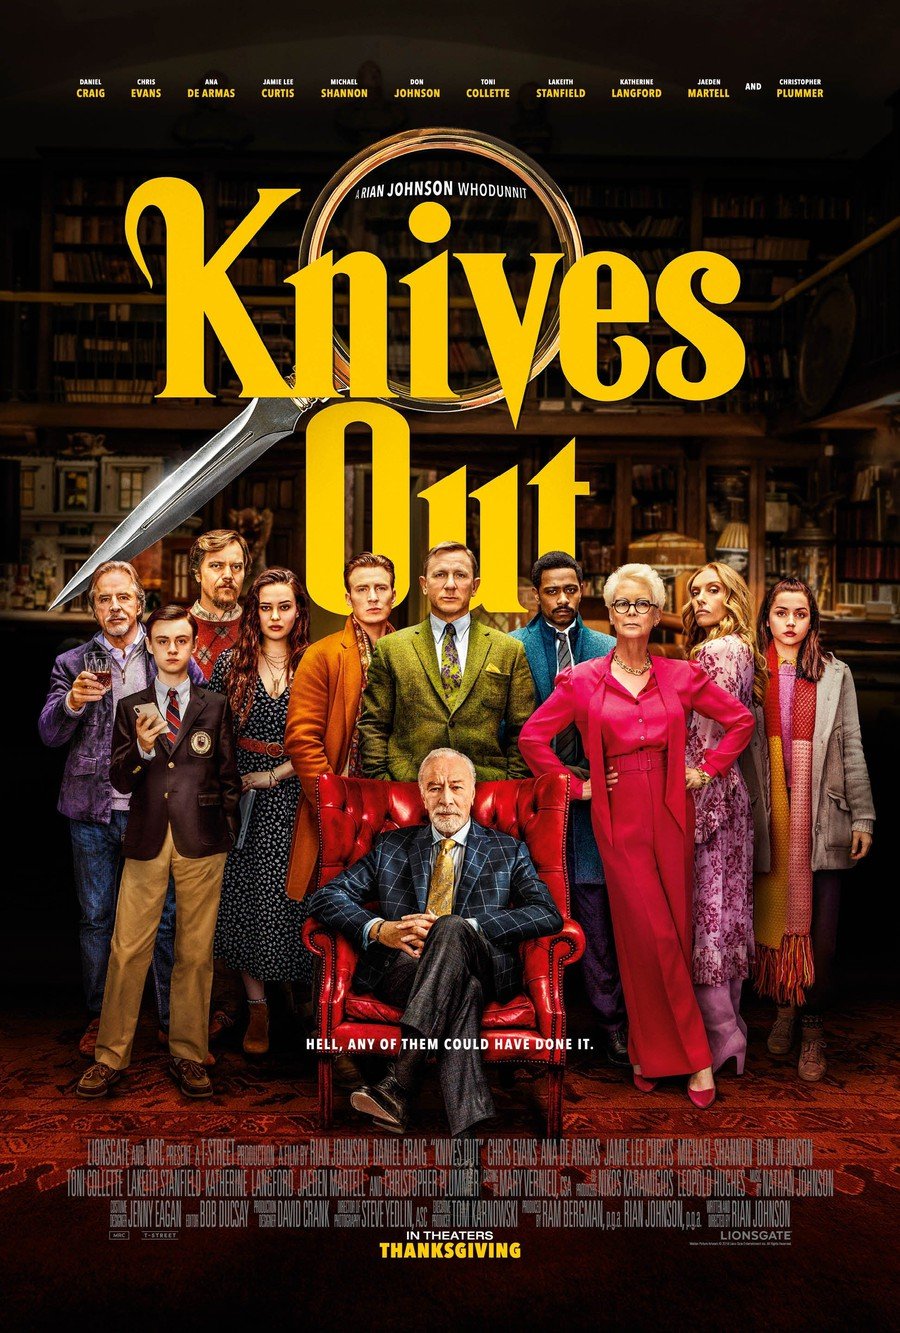 Poster for Knives Out, a recent and acclaimed movie series in the “whodunnit” style”